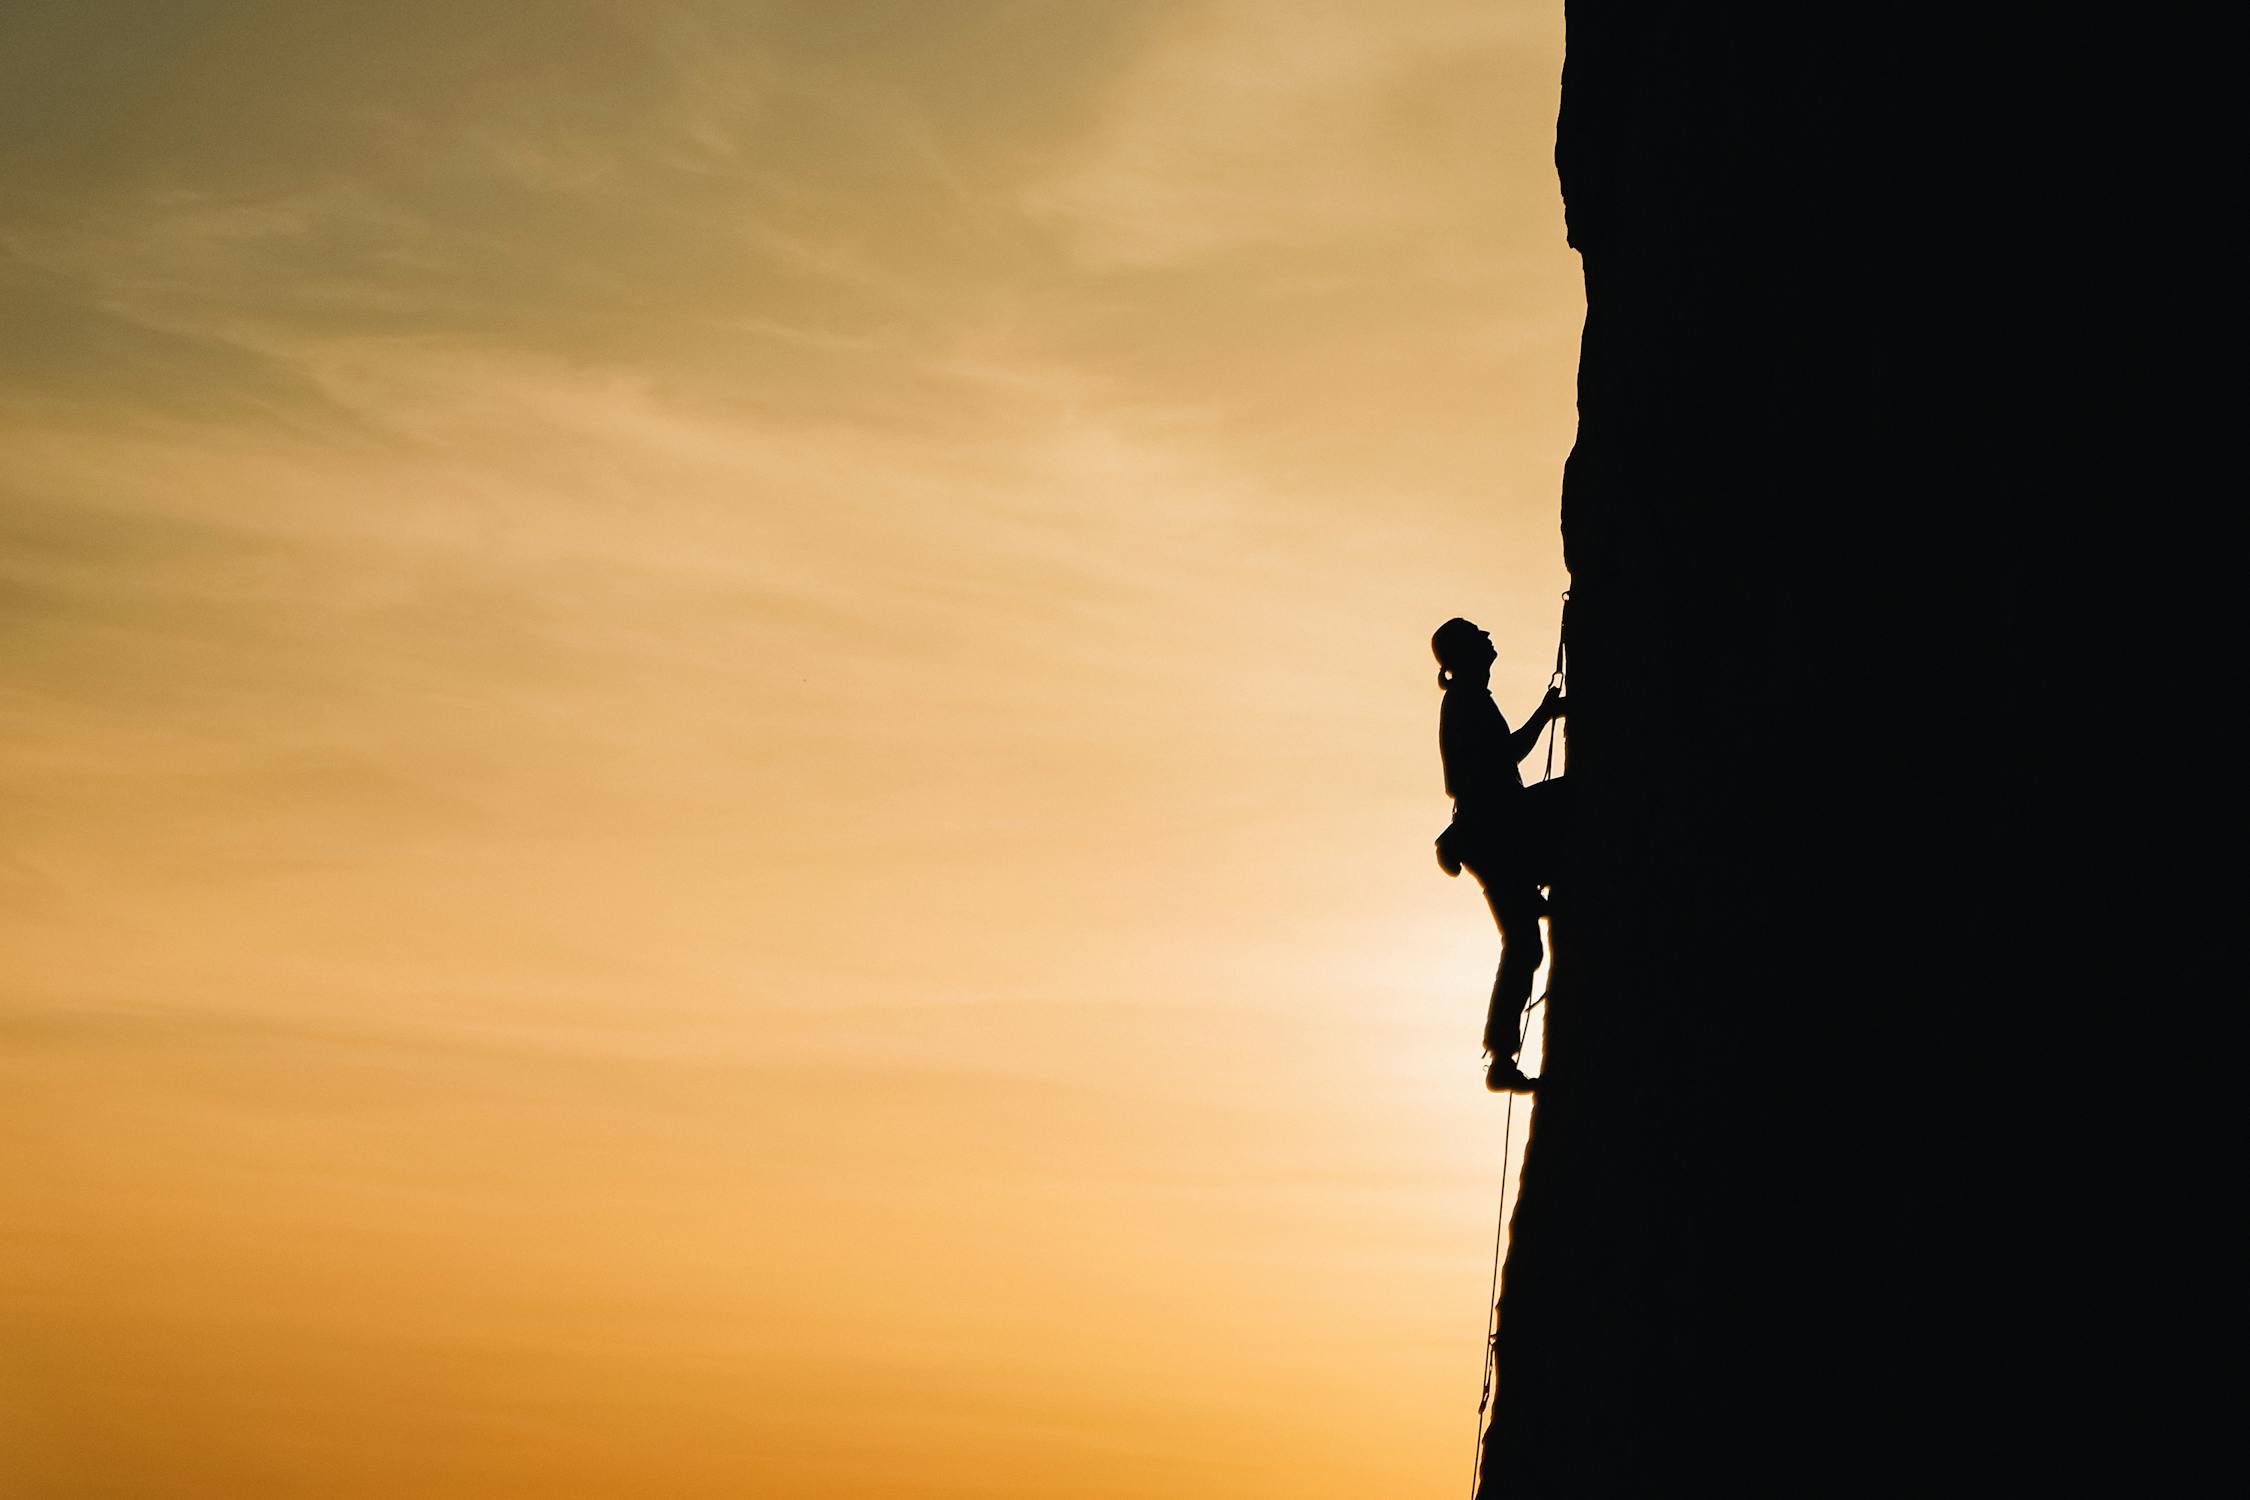 Person rock climbing during sunset, a metaphor for customer's expending a lot of effort 